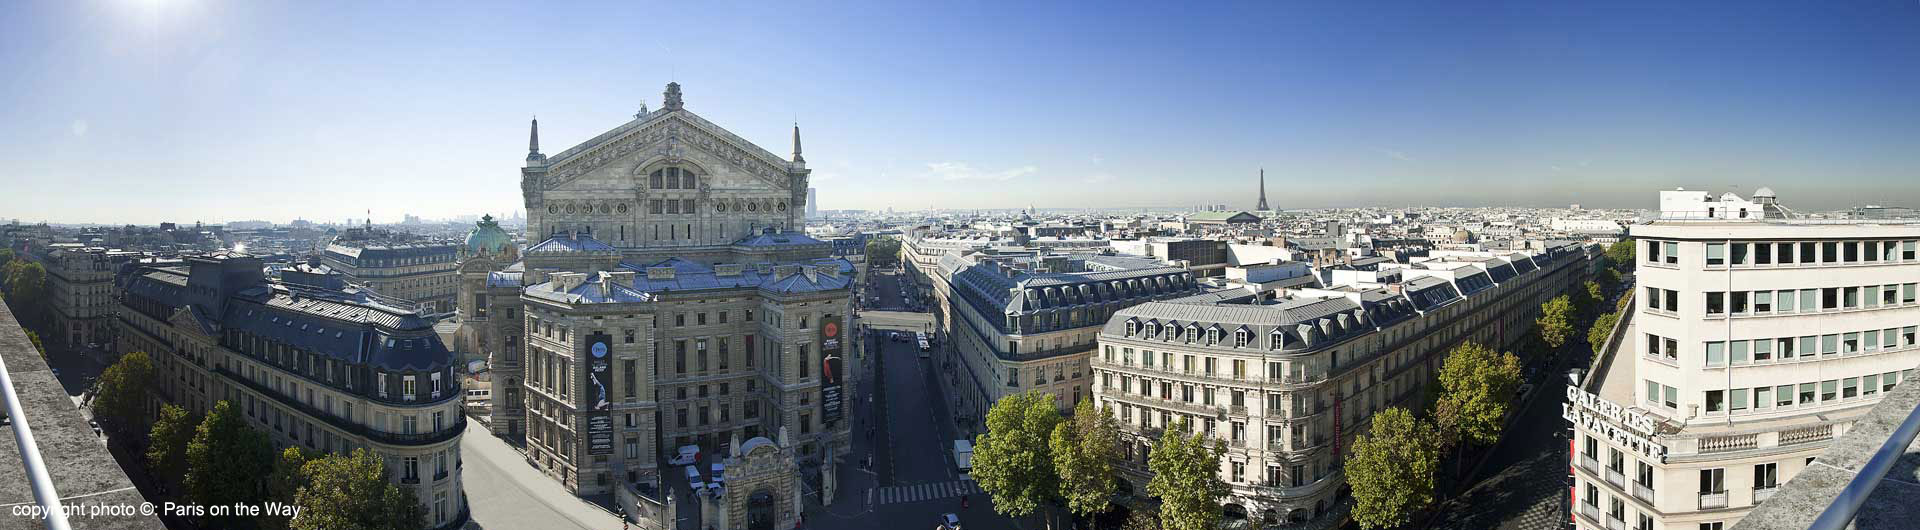 PANORAMIC VIEW OVER THE PARIS ROOFTOPS